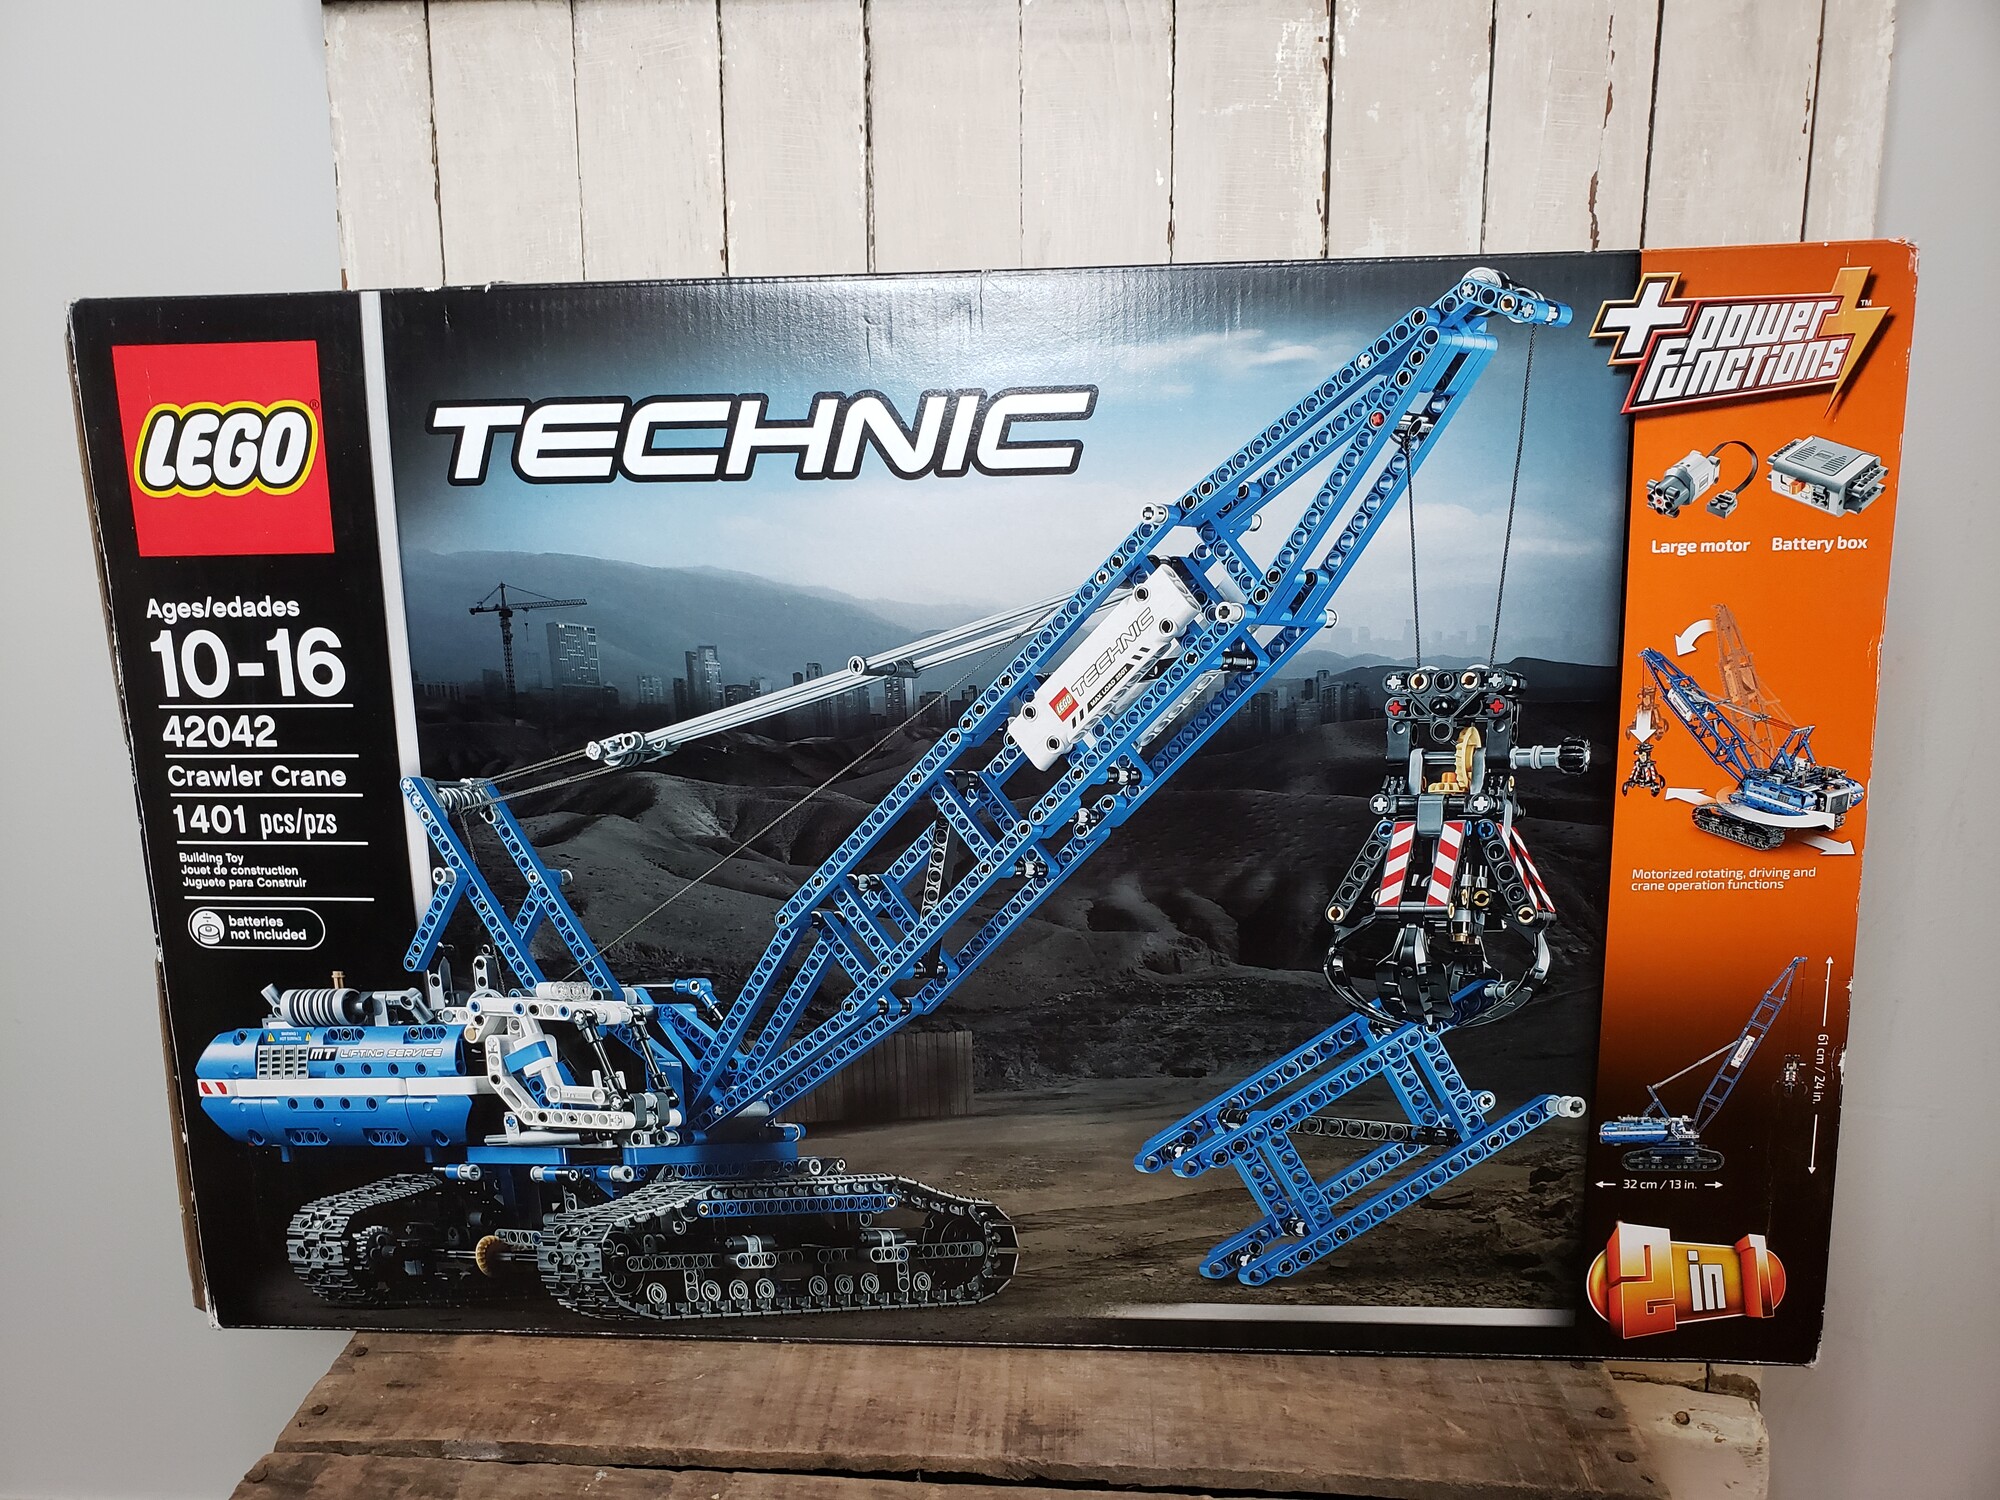 LEGO Technic Crawler Crane 42042, Used and in good conditon. Built by an adult for display collection.